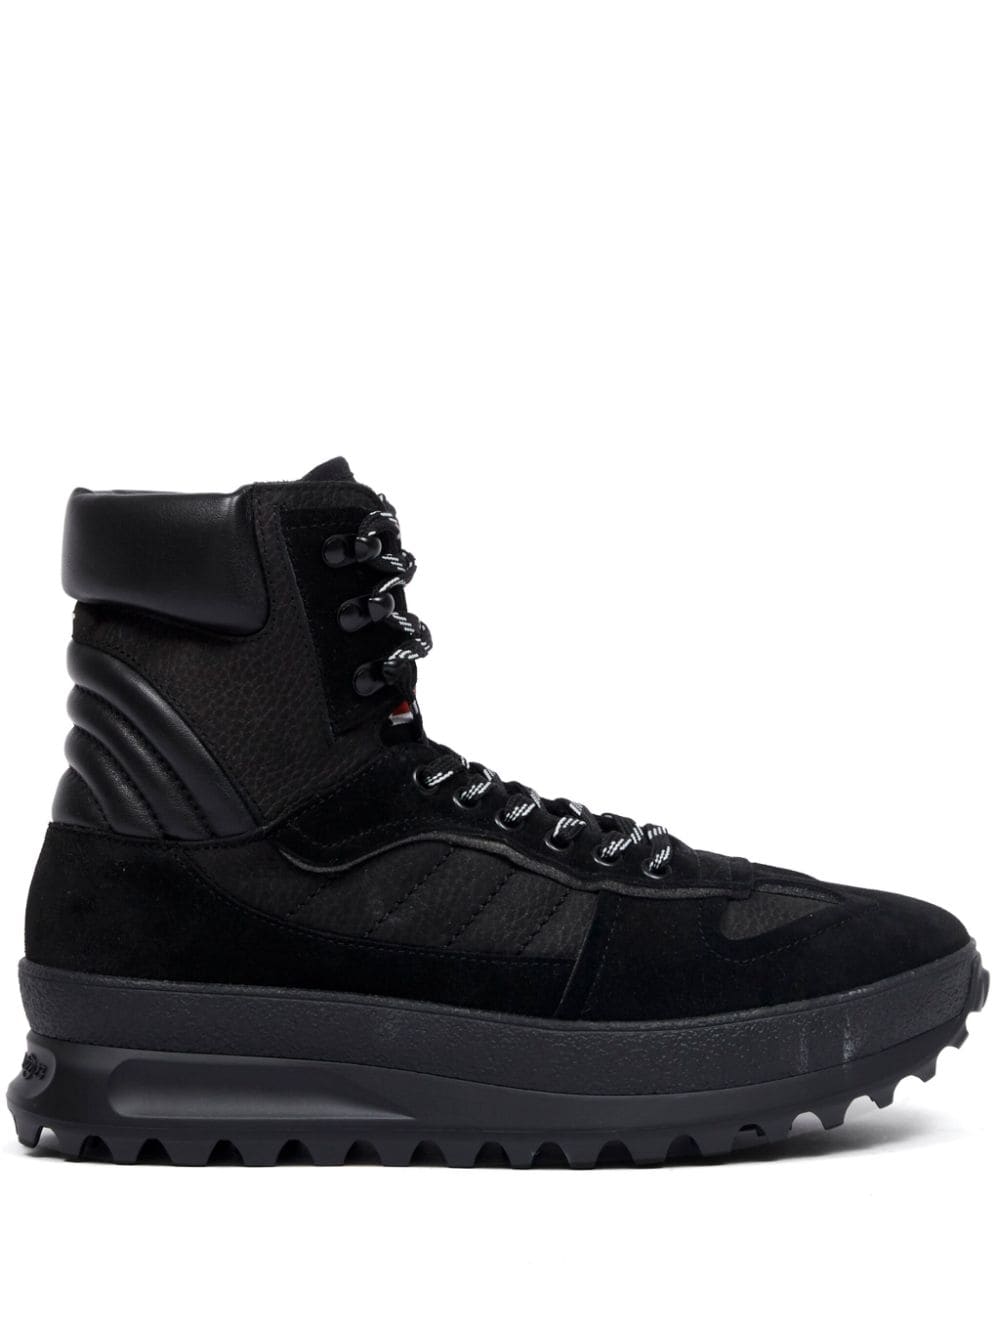 MAISON MARGIELA CLIMBER HIGH-TOP LEATHER SNEAKERS